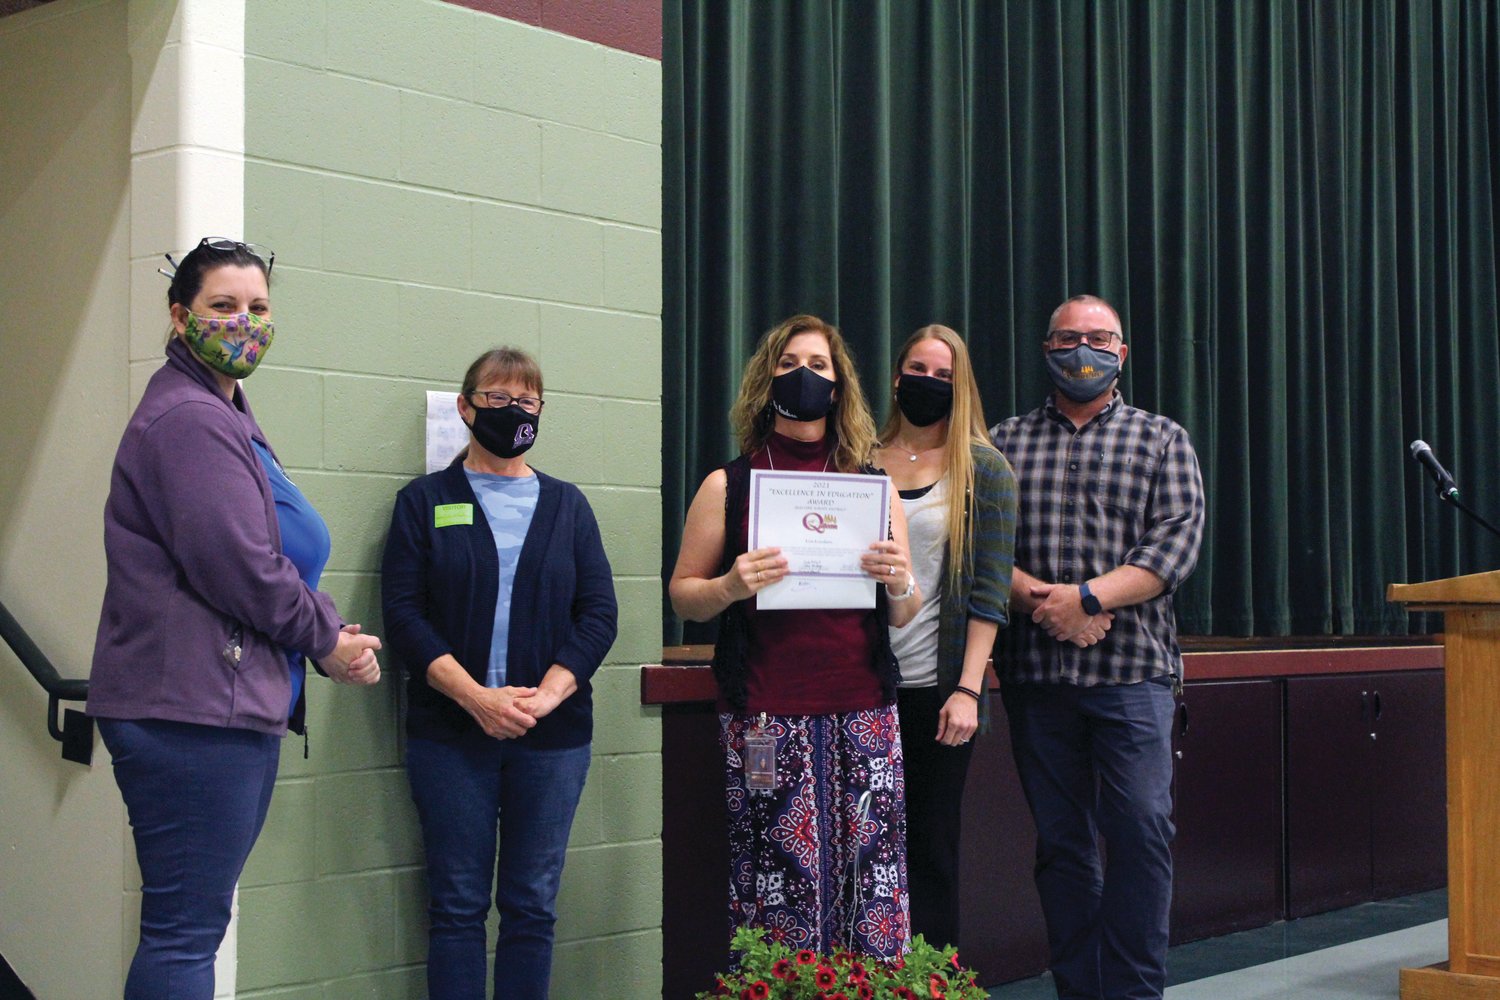 Jessica Gossette, Cindy Pollard, Kimberly Knudson, Trisha Freiberg, Frank Redmon pose for a photo after Knudson was awarded the Excellence in Education Award during a recent ceremony.